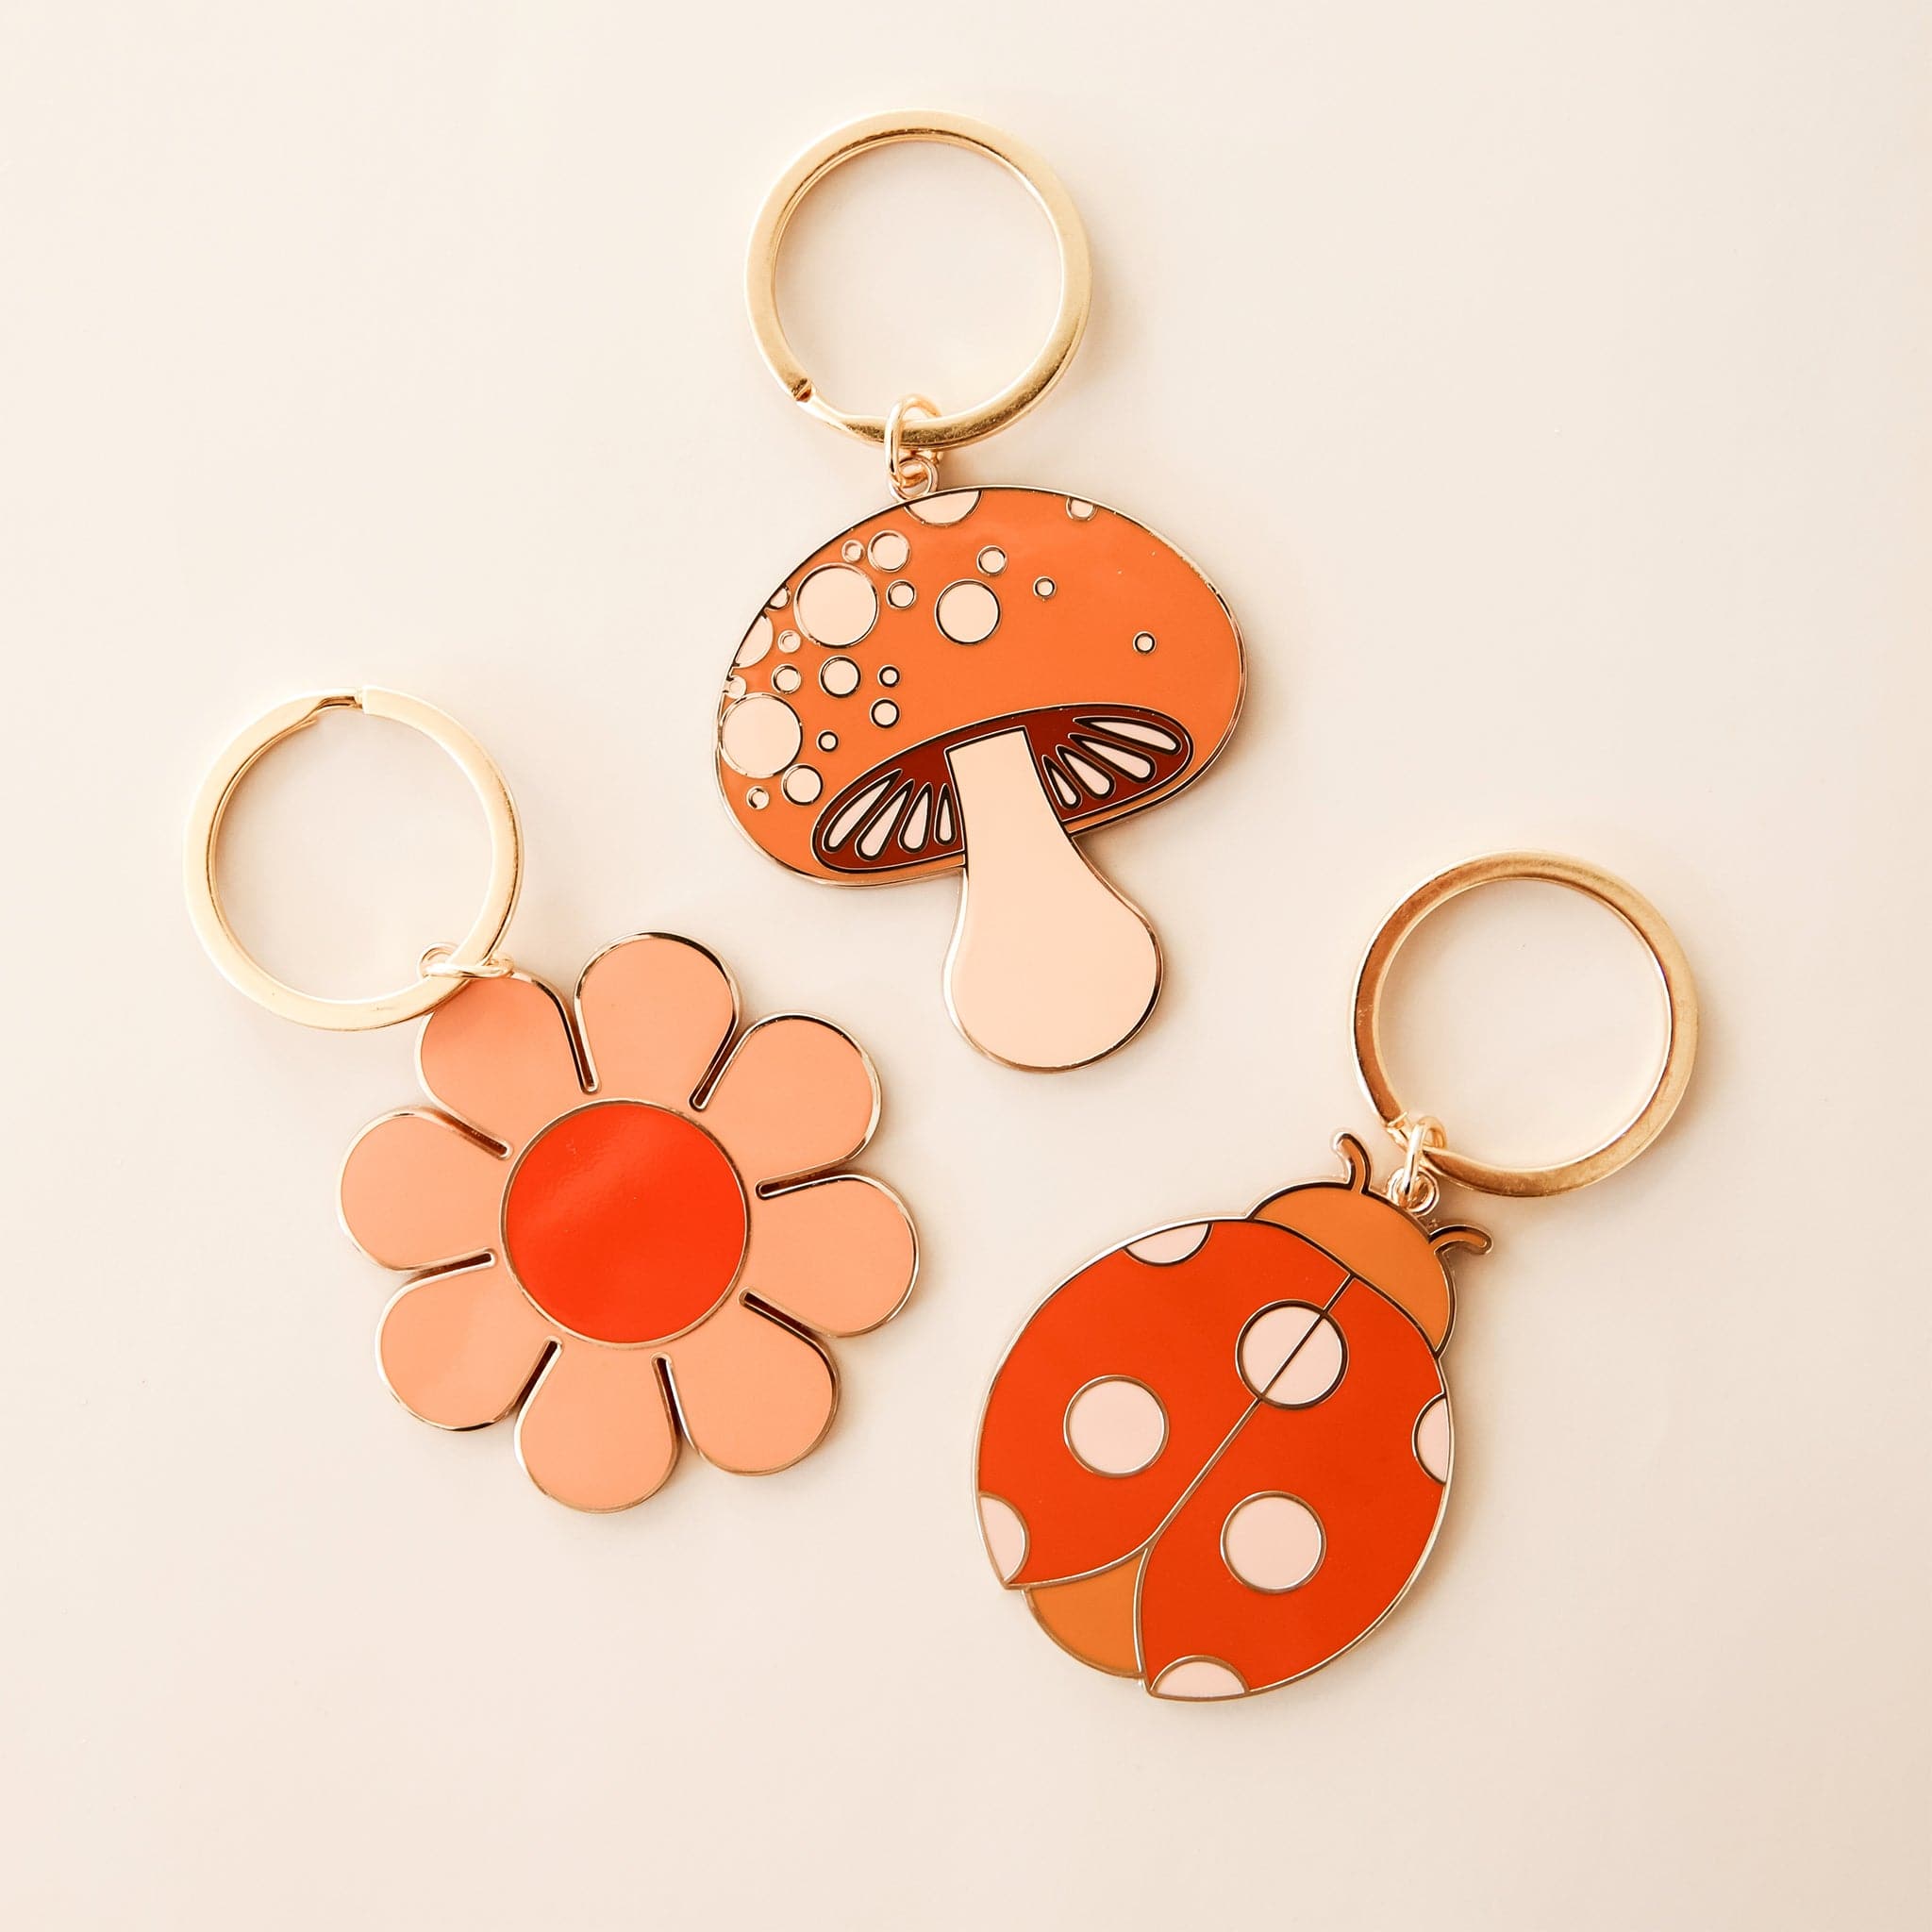 Three retro-inspired keychains, including a flower, mushroom and lady bug. Each keychain has gold detailing and a golden key ring. 